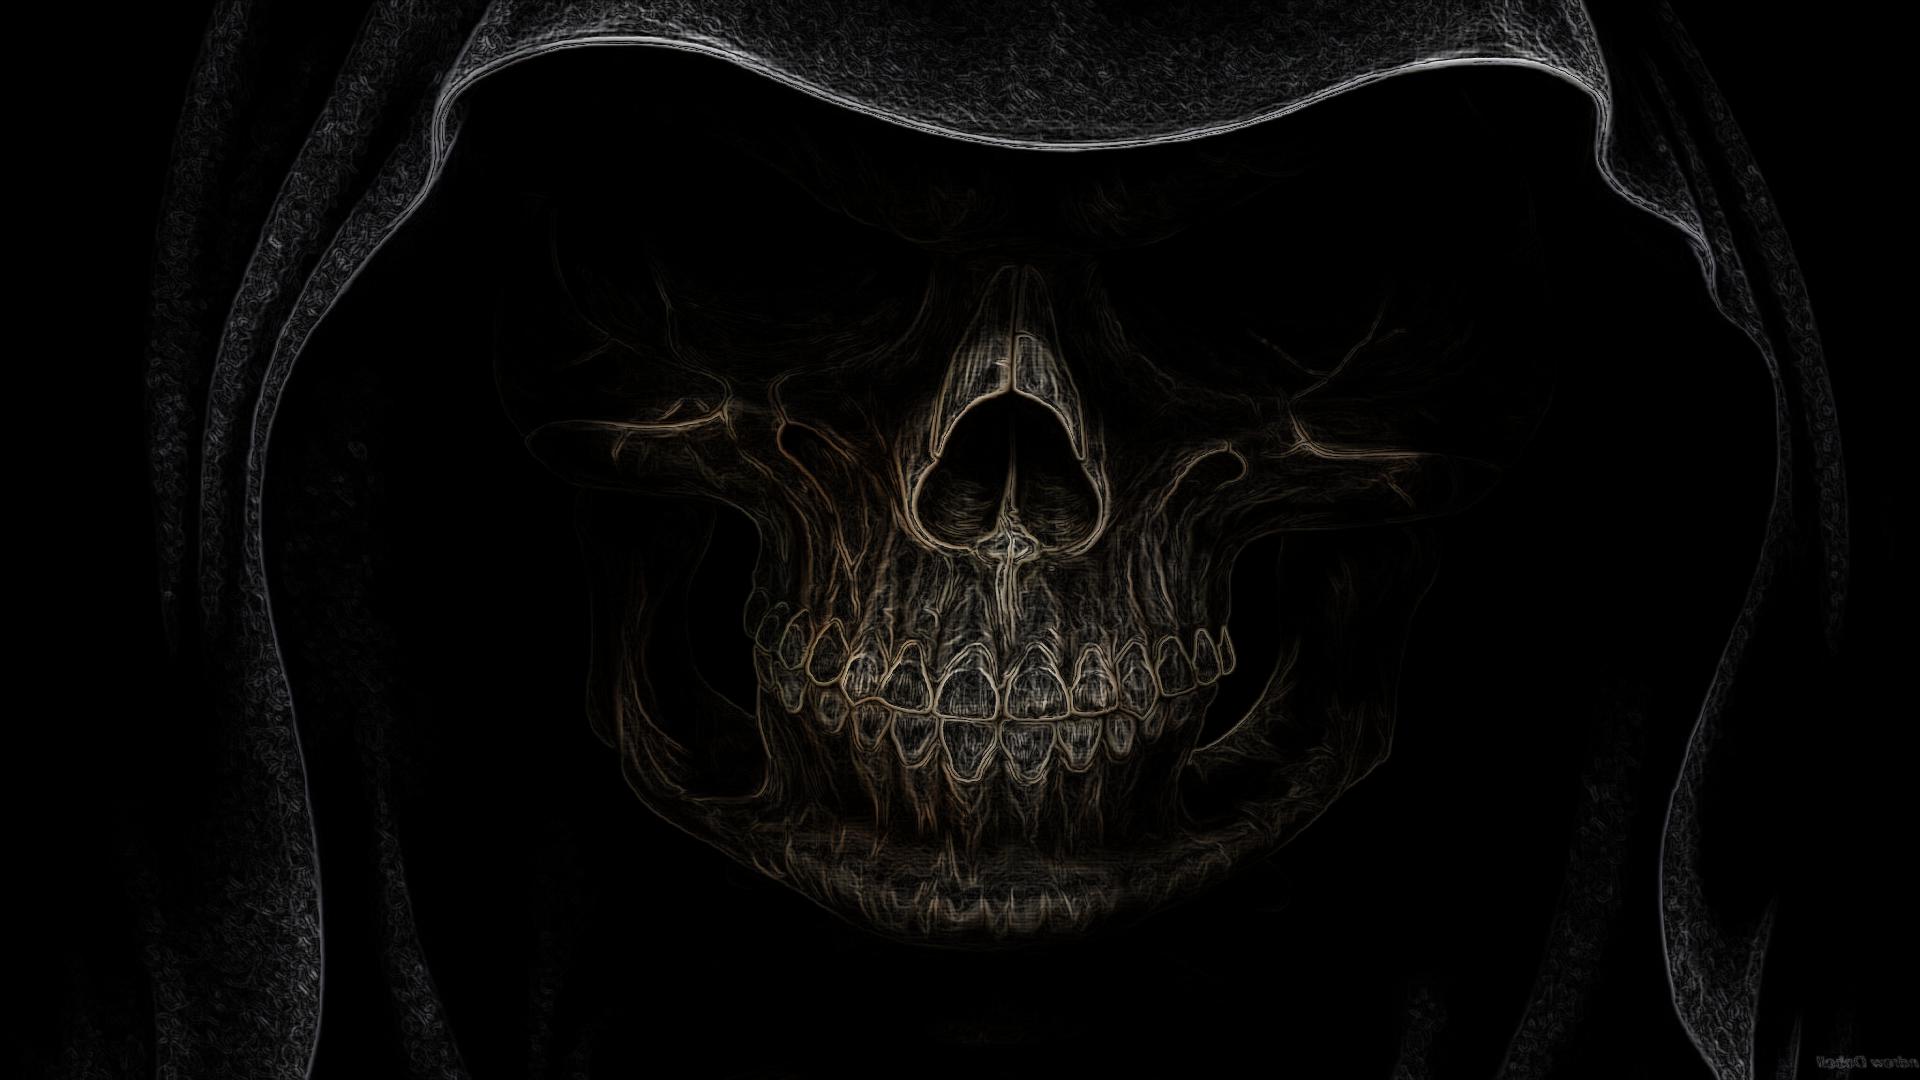 Horror Full HD Wallpaper and Background Image | 1920x1080 | ID:505275